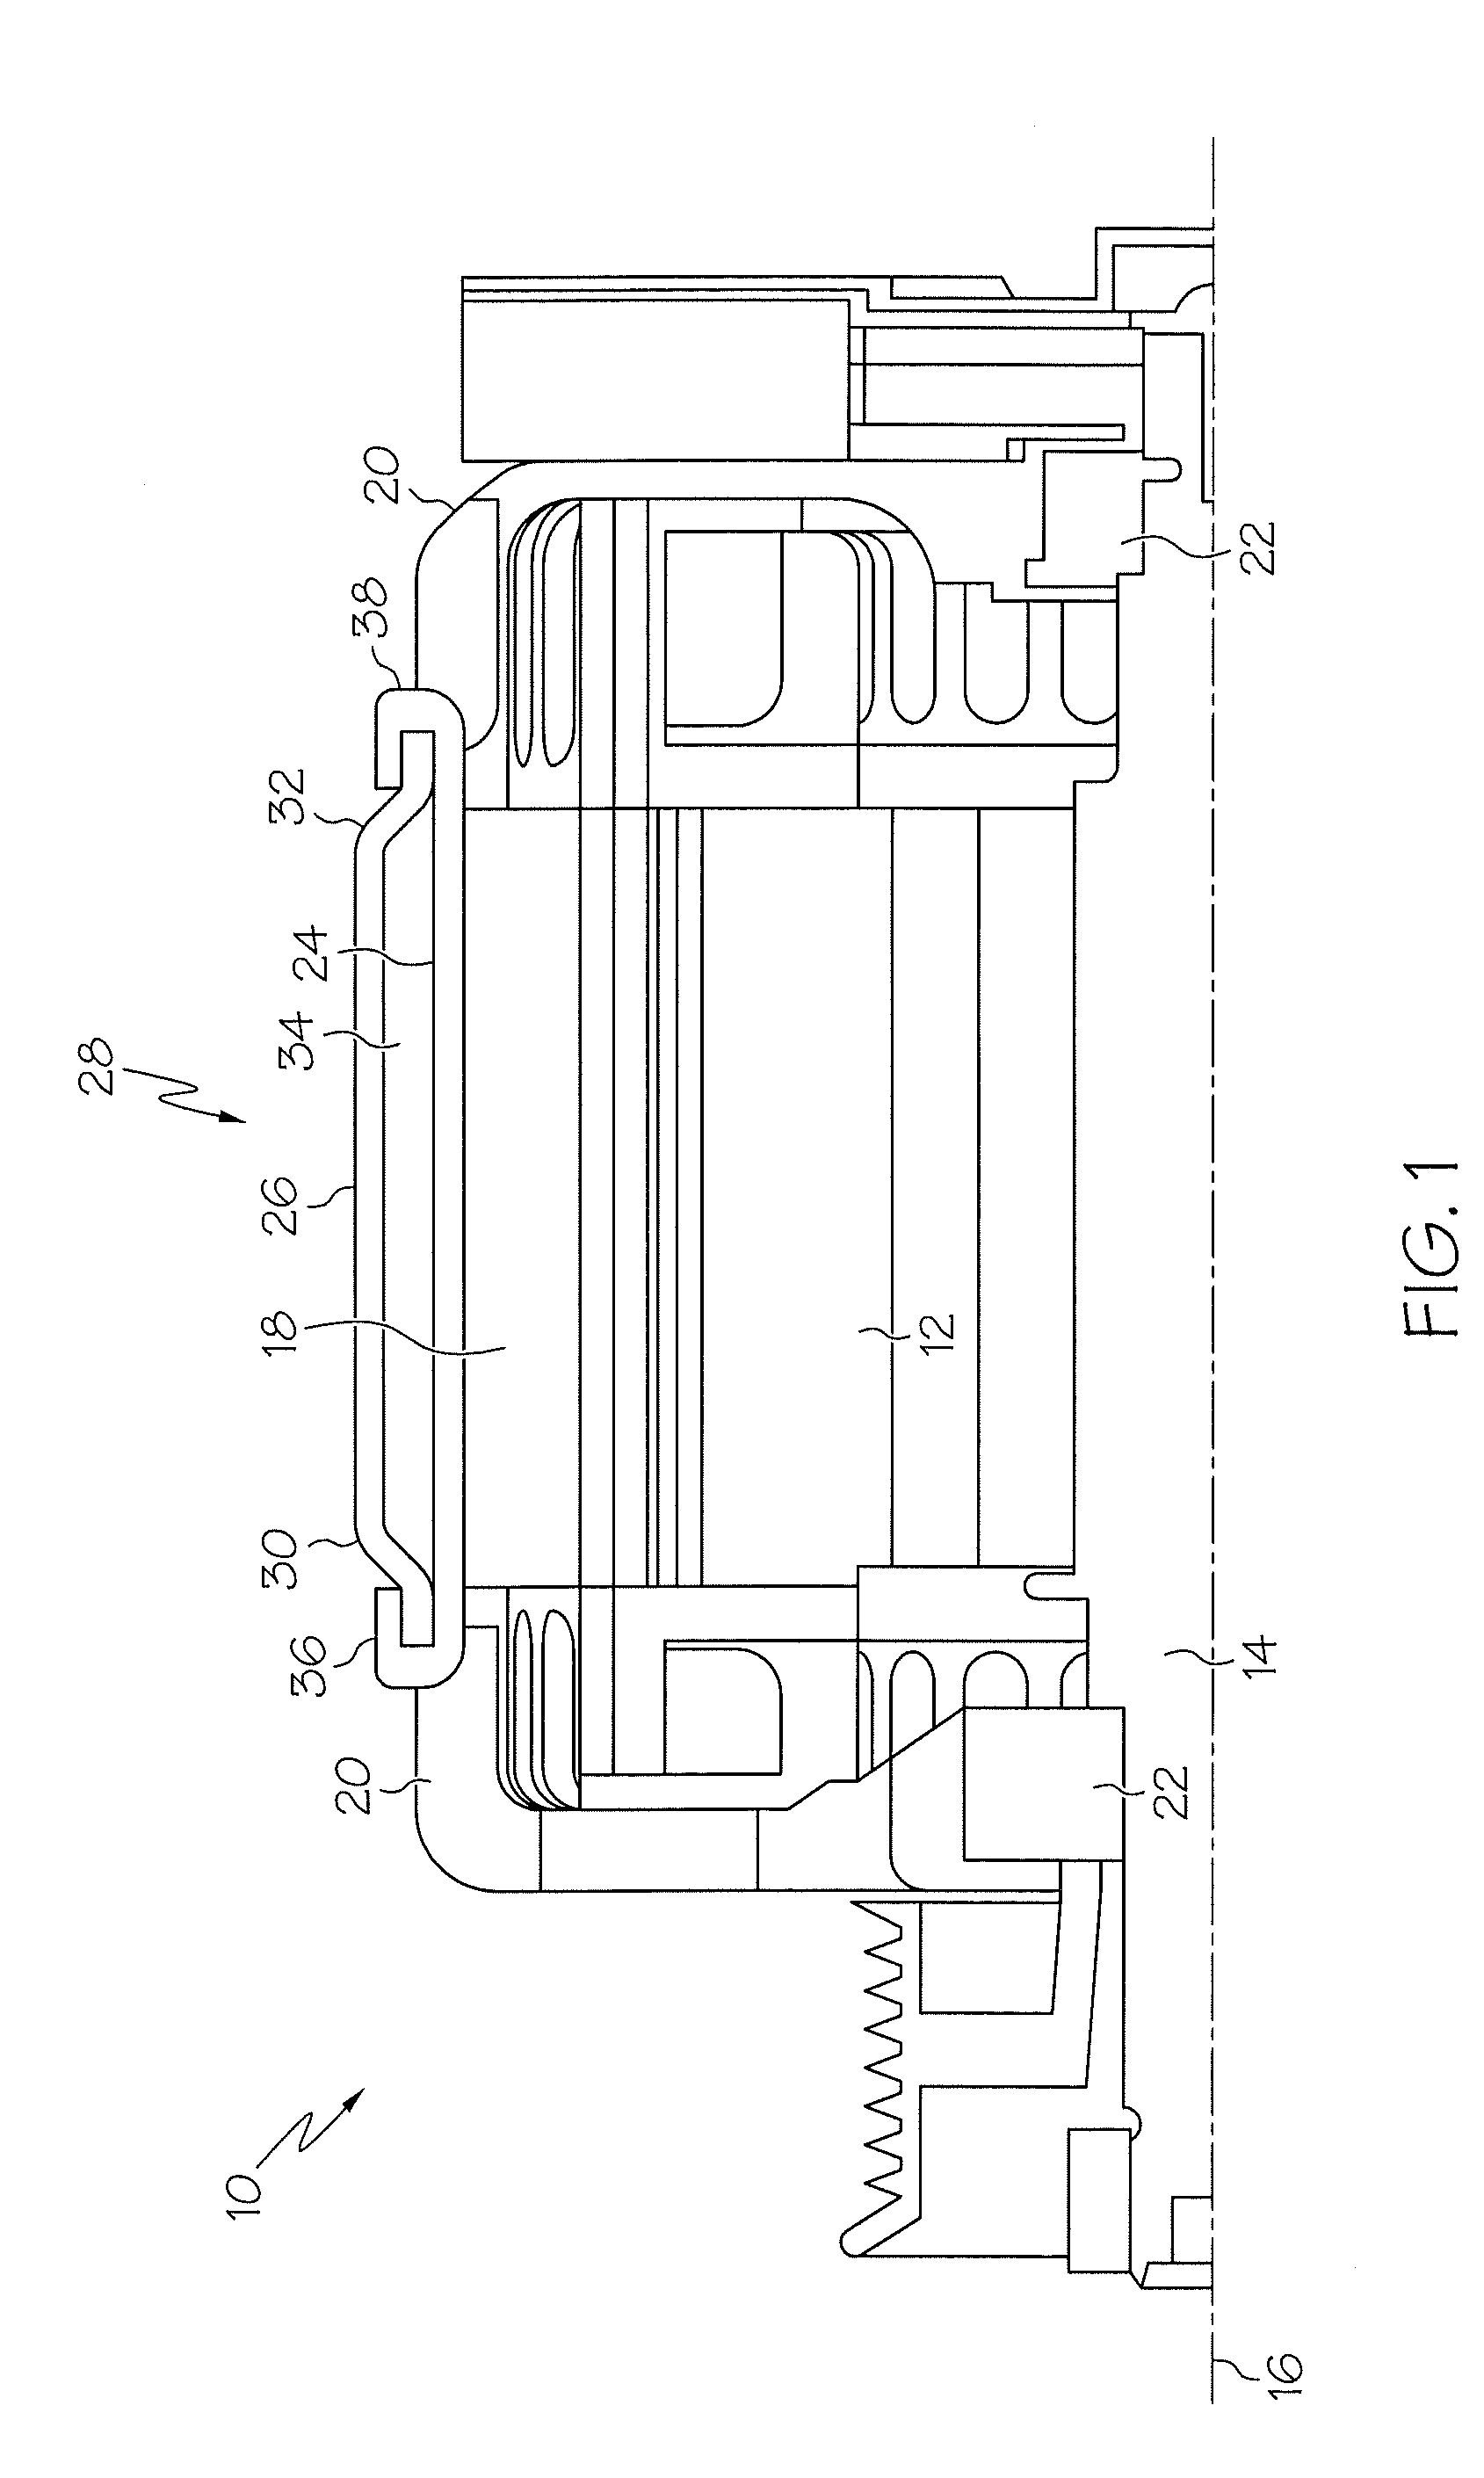 Liquid cooling system of an electric machine